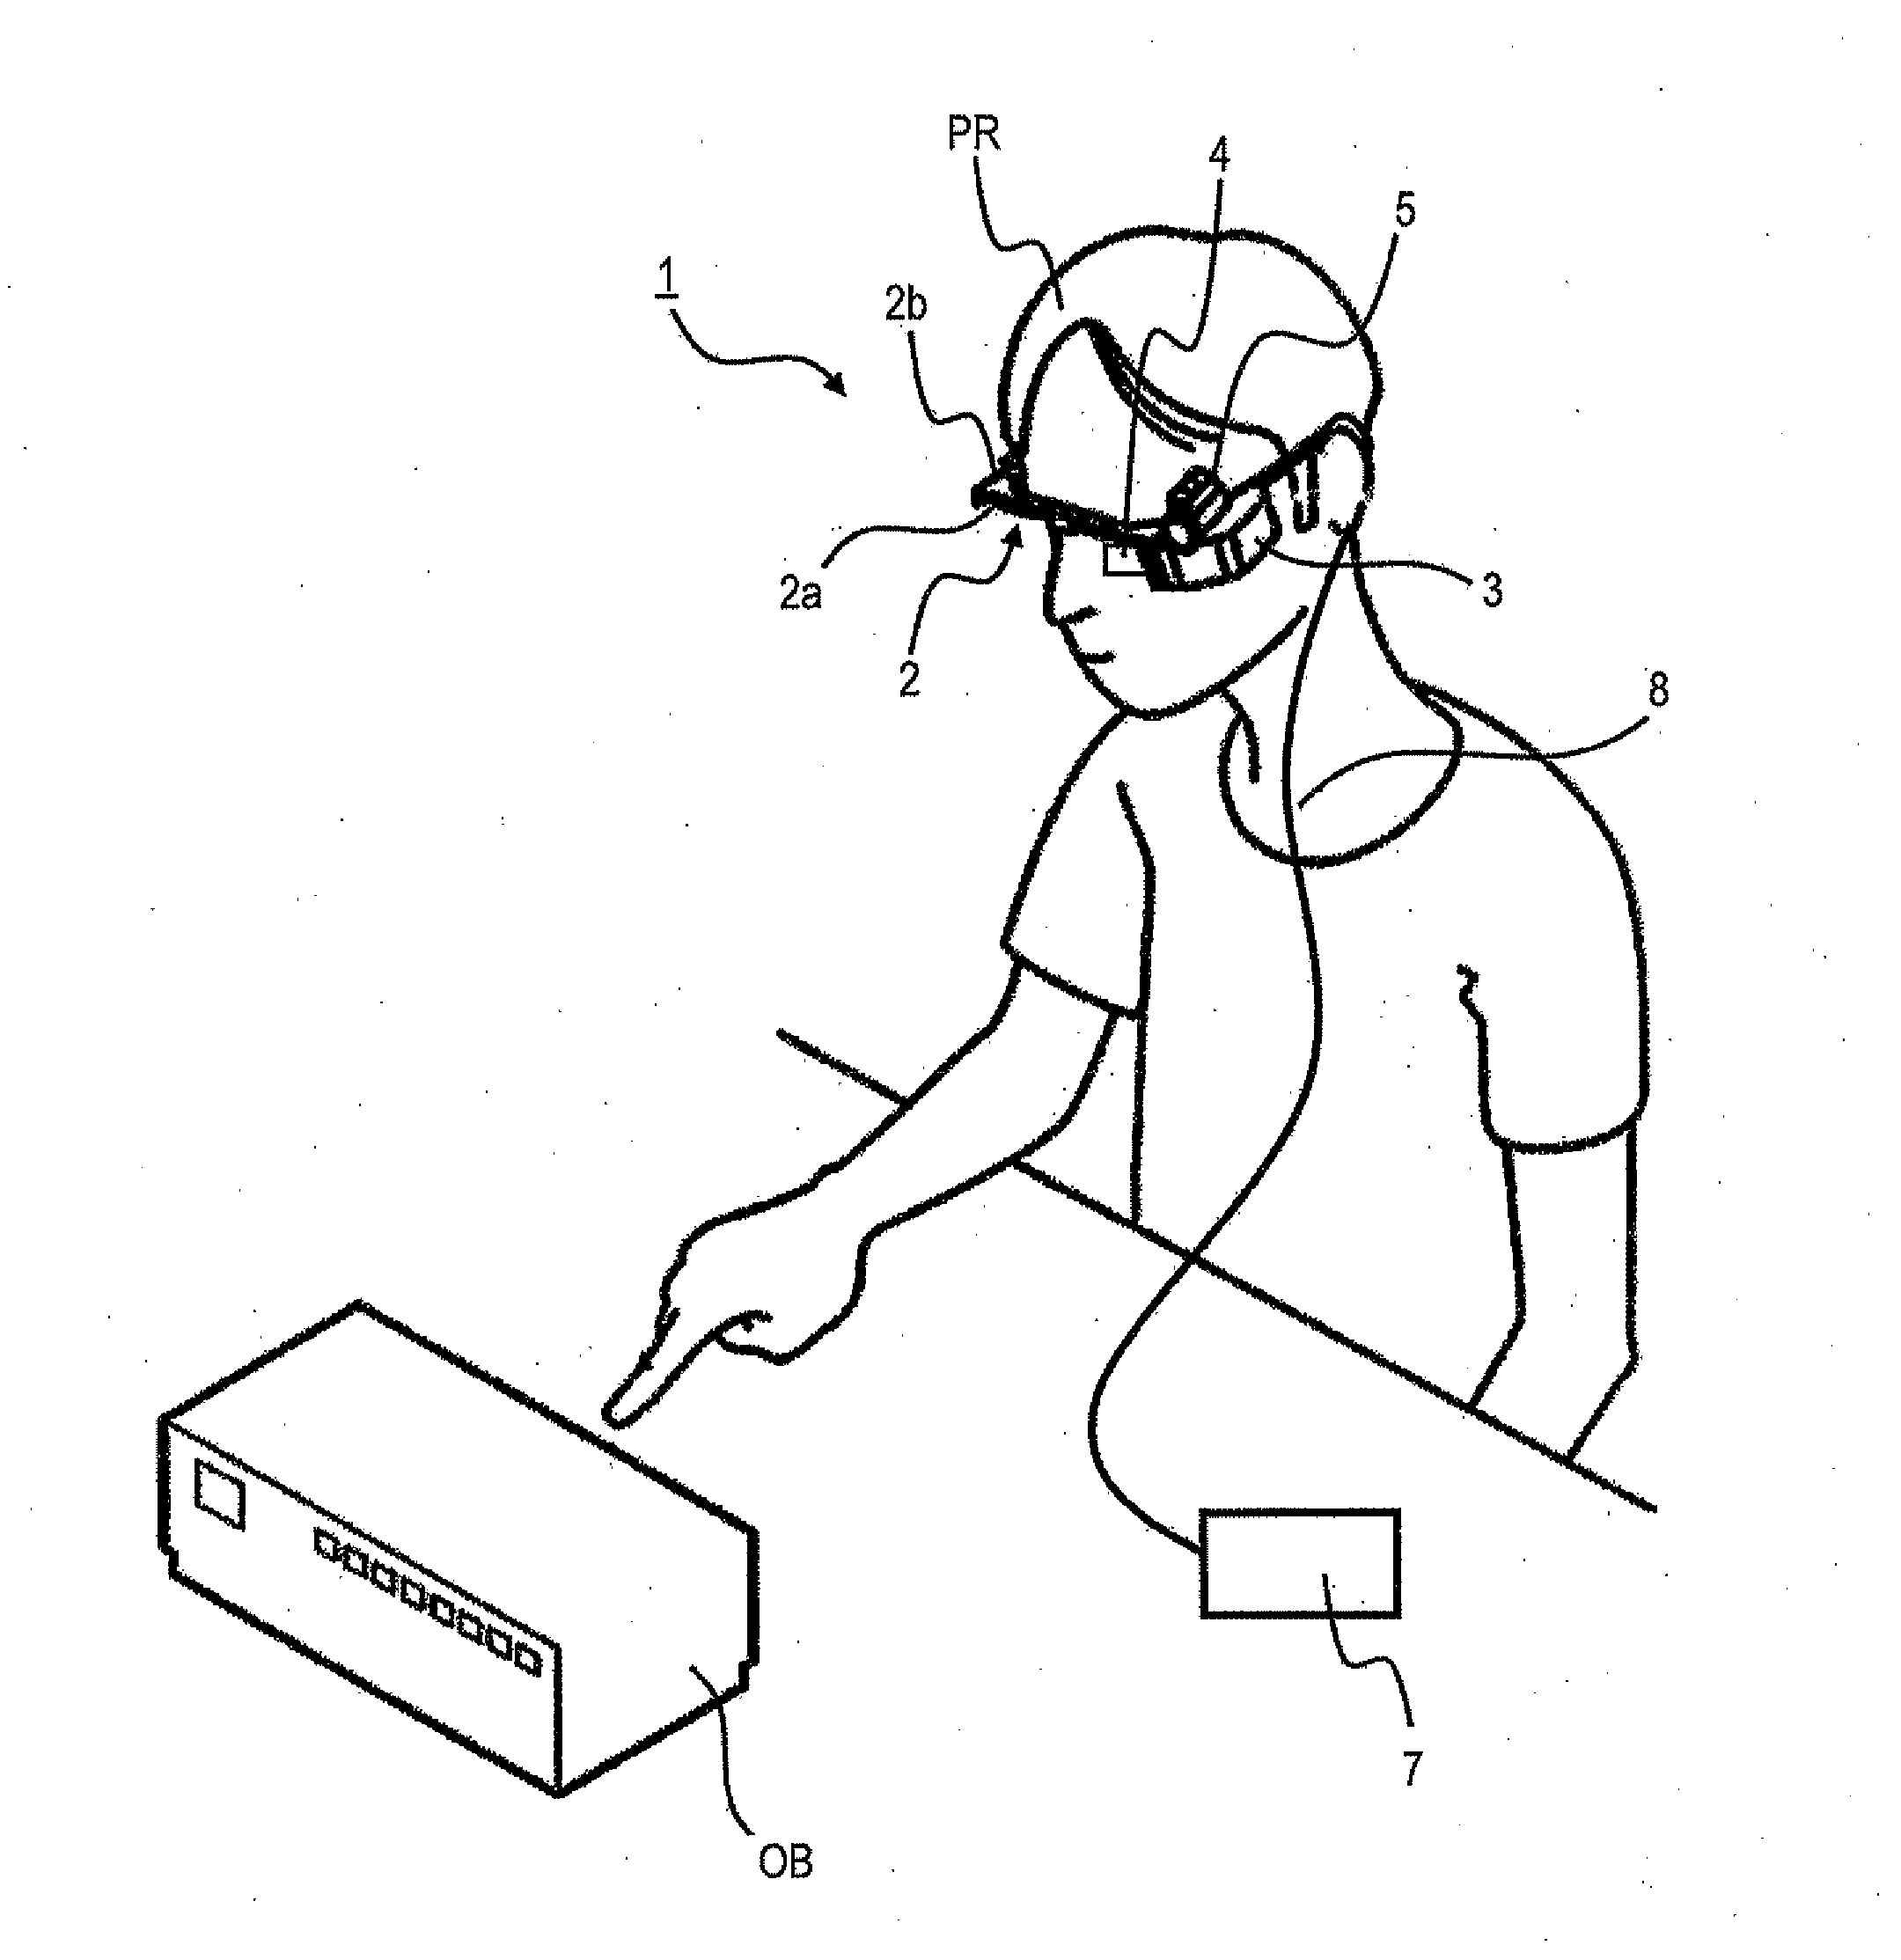 Head mounted display apparatus and image sharing system using the same